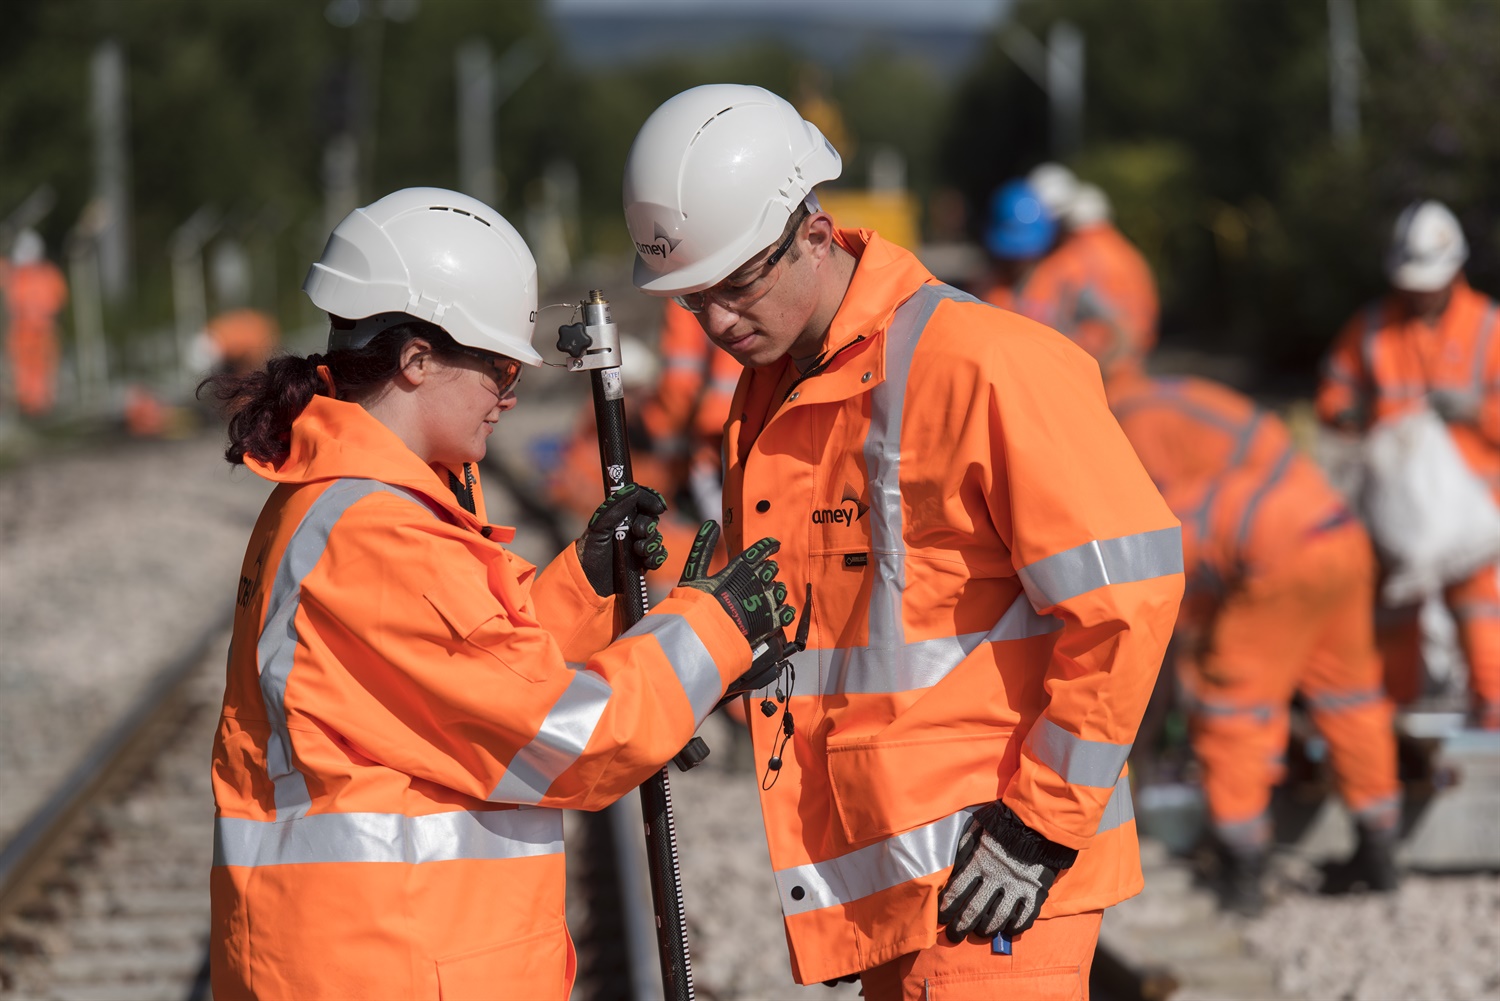 Amey teams up with University for railway engineering apprenticeship 